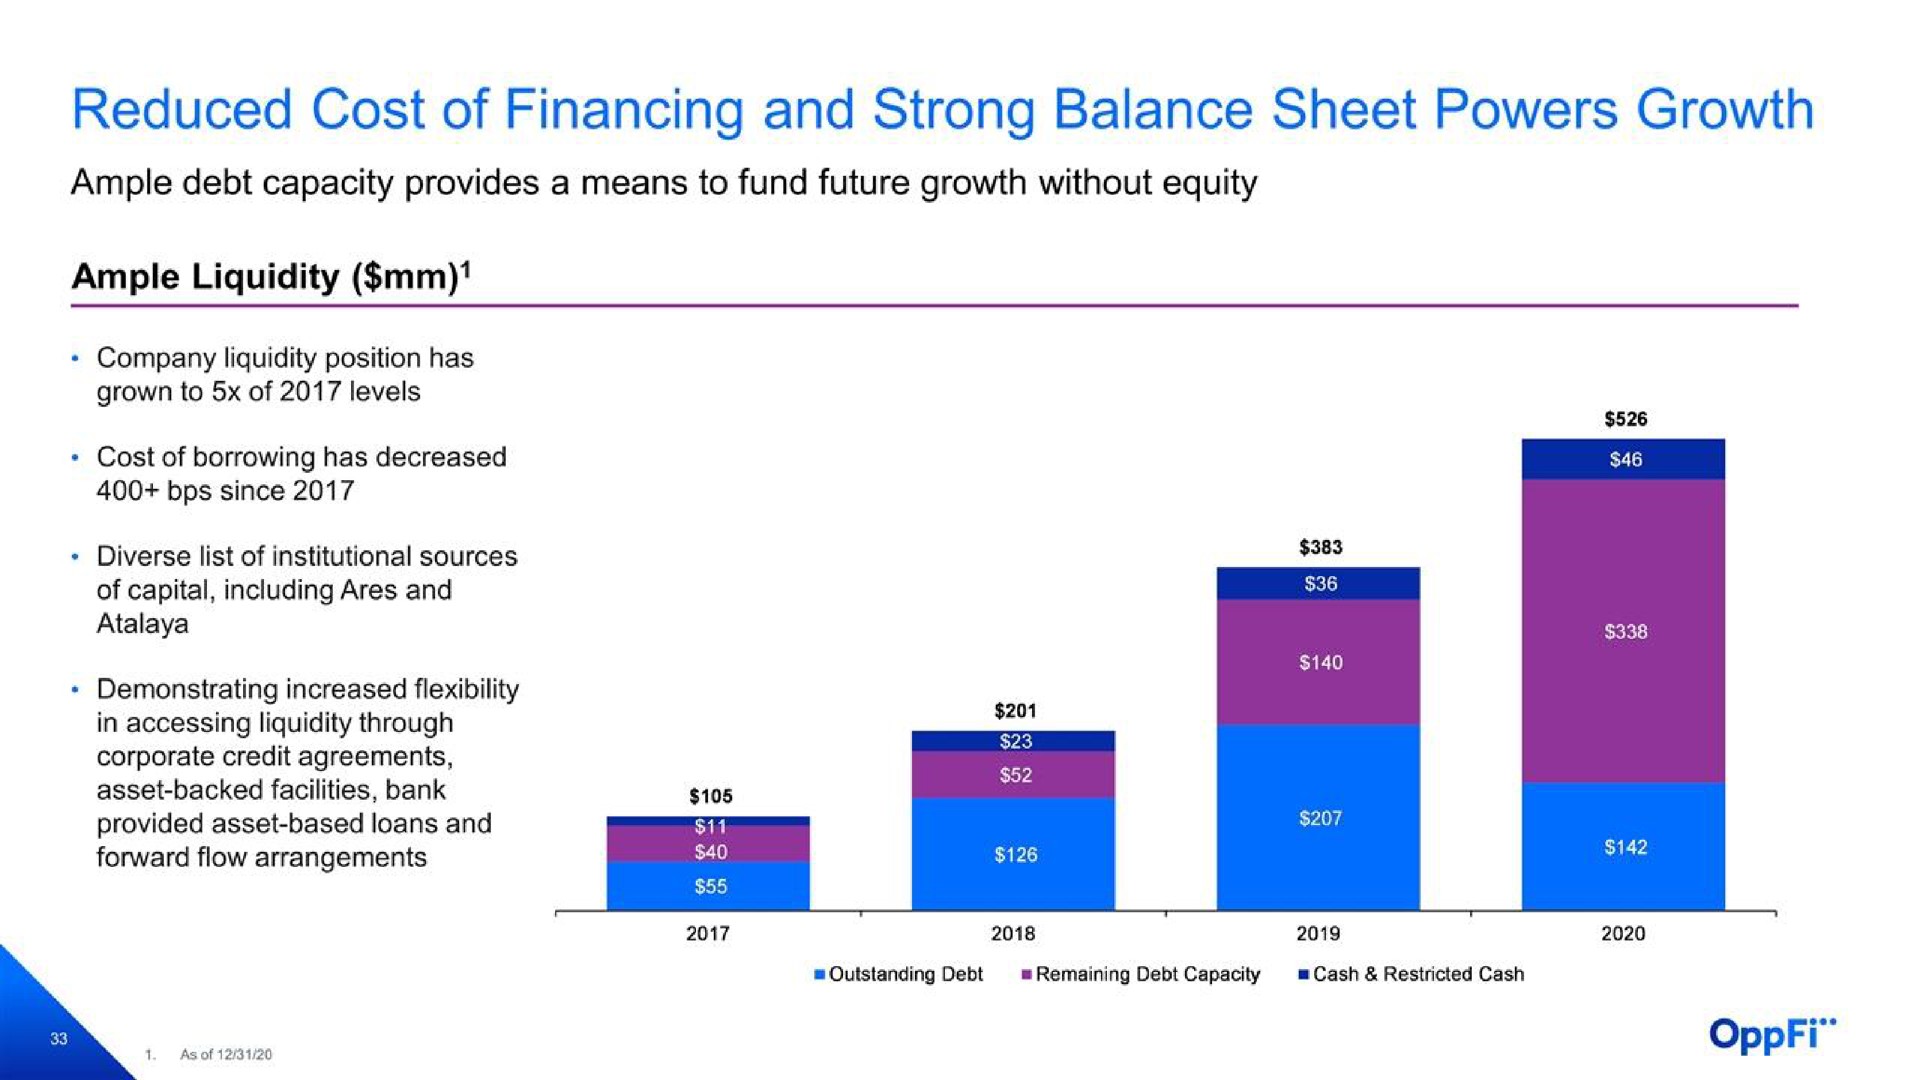 reduced cost of financing and strong balance sheet powers growth | OppFi